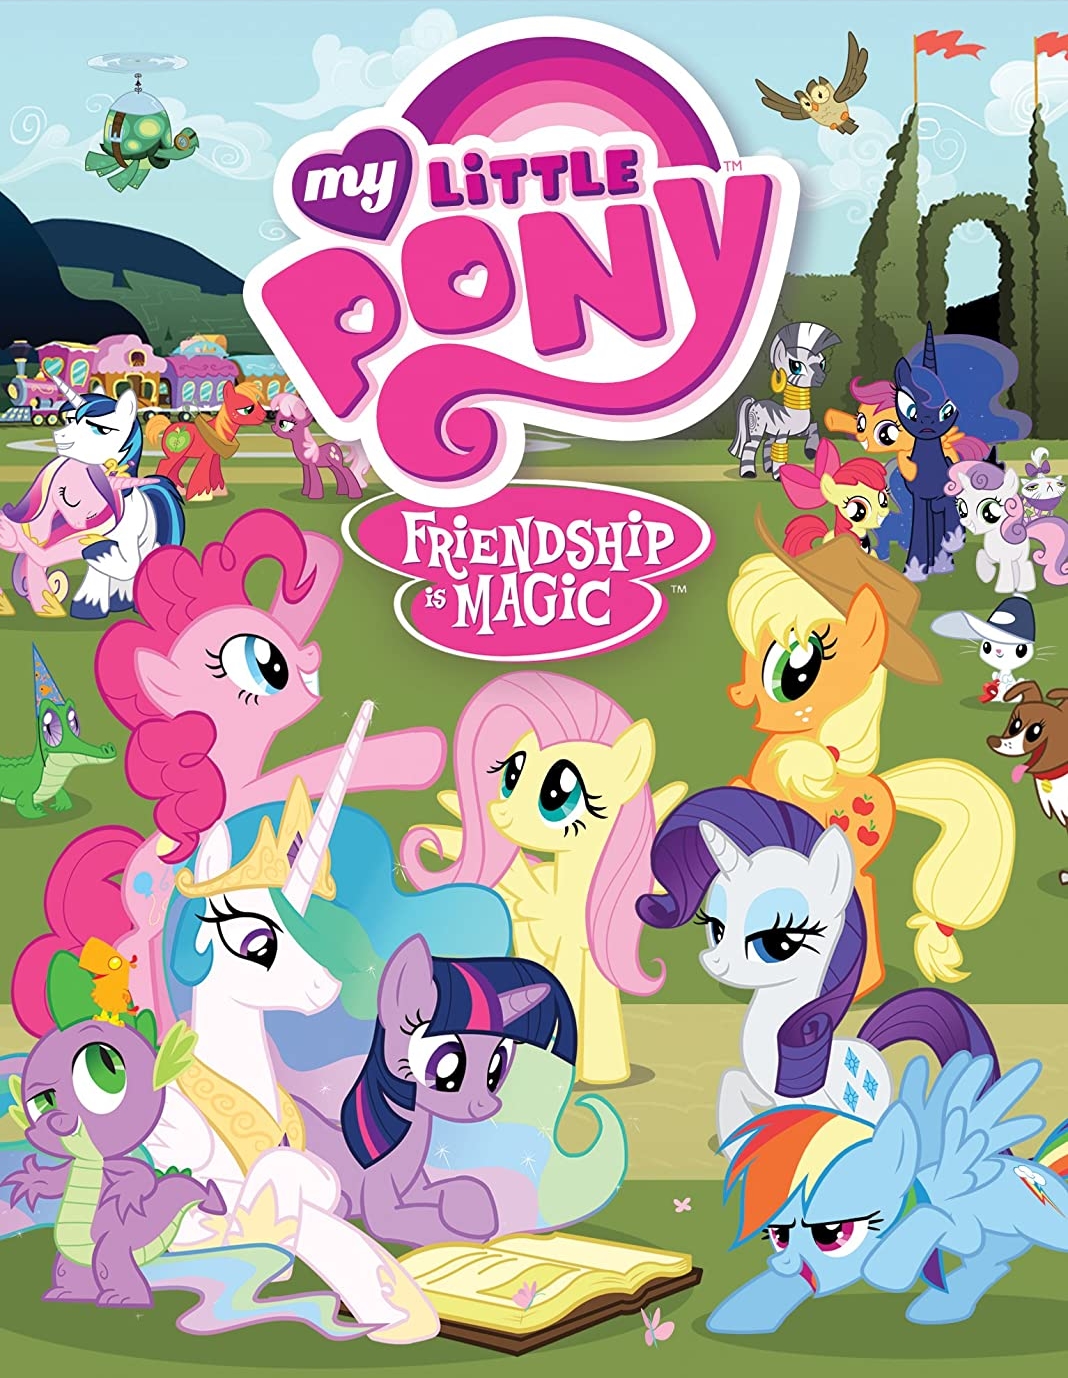 https://static.wikia.nocookie.net/iepfanon/images/7/71/My_Little_Pony_Friendship_Is_Magic_poster.jpg/revision/latest?cb=20220817025221